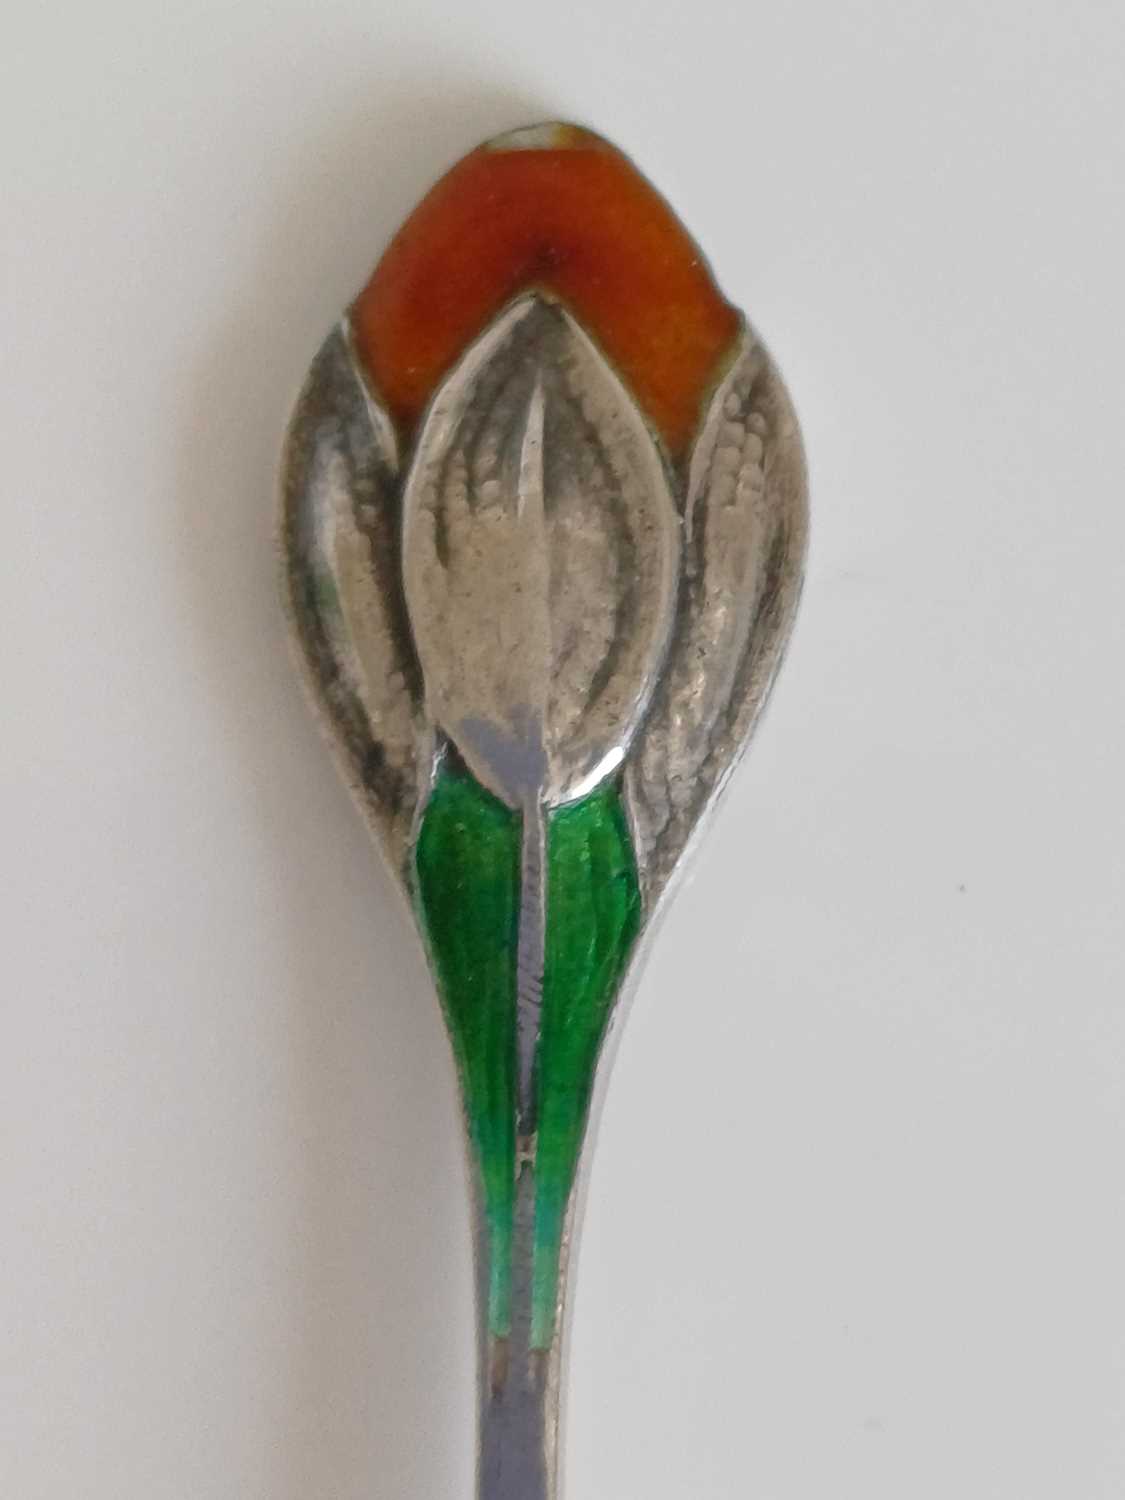 A Matched Set of Six Arts & Crafts Silver and Enamel Crocus Coffee Spoons, made by William Hair - Image 9 of 14